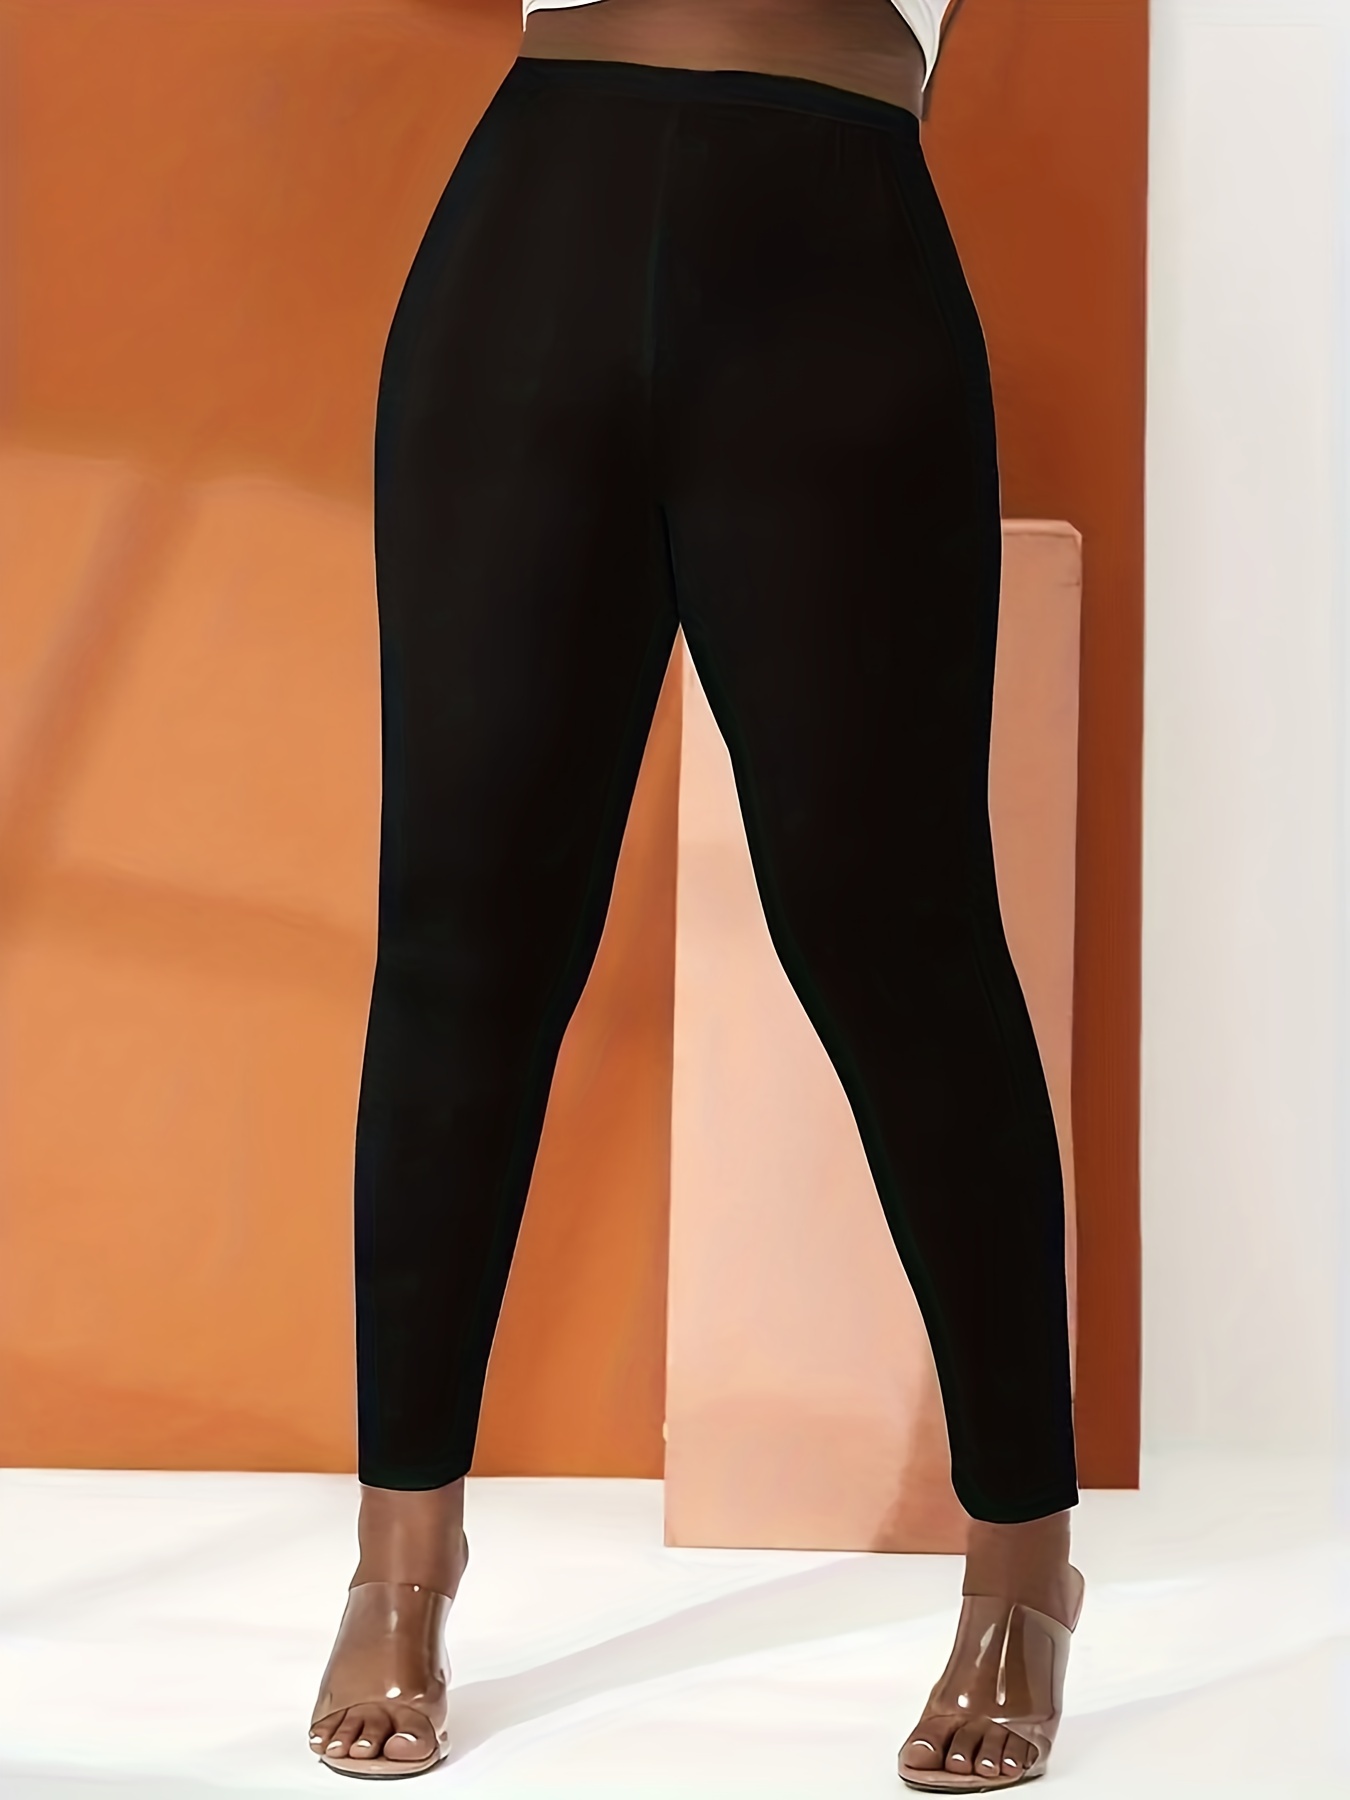 Plus Size Solid High * Elastic Skinny Pants, Women's Plus High Stretch  Casual Sports Leggings